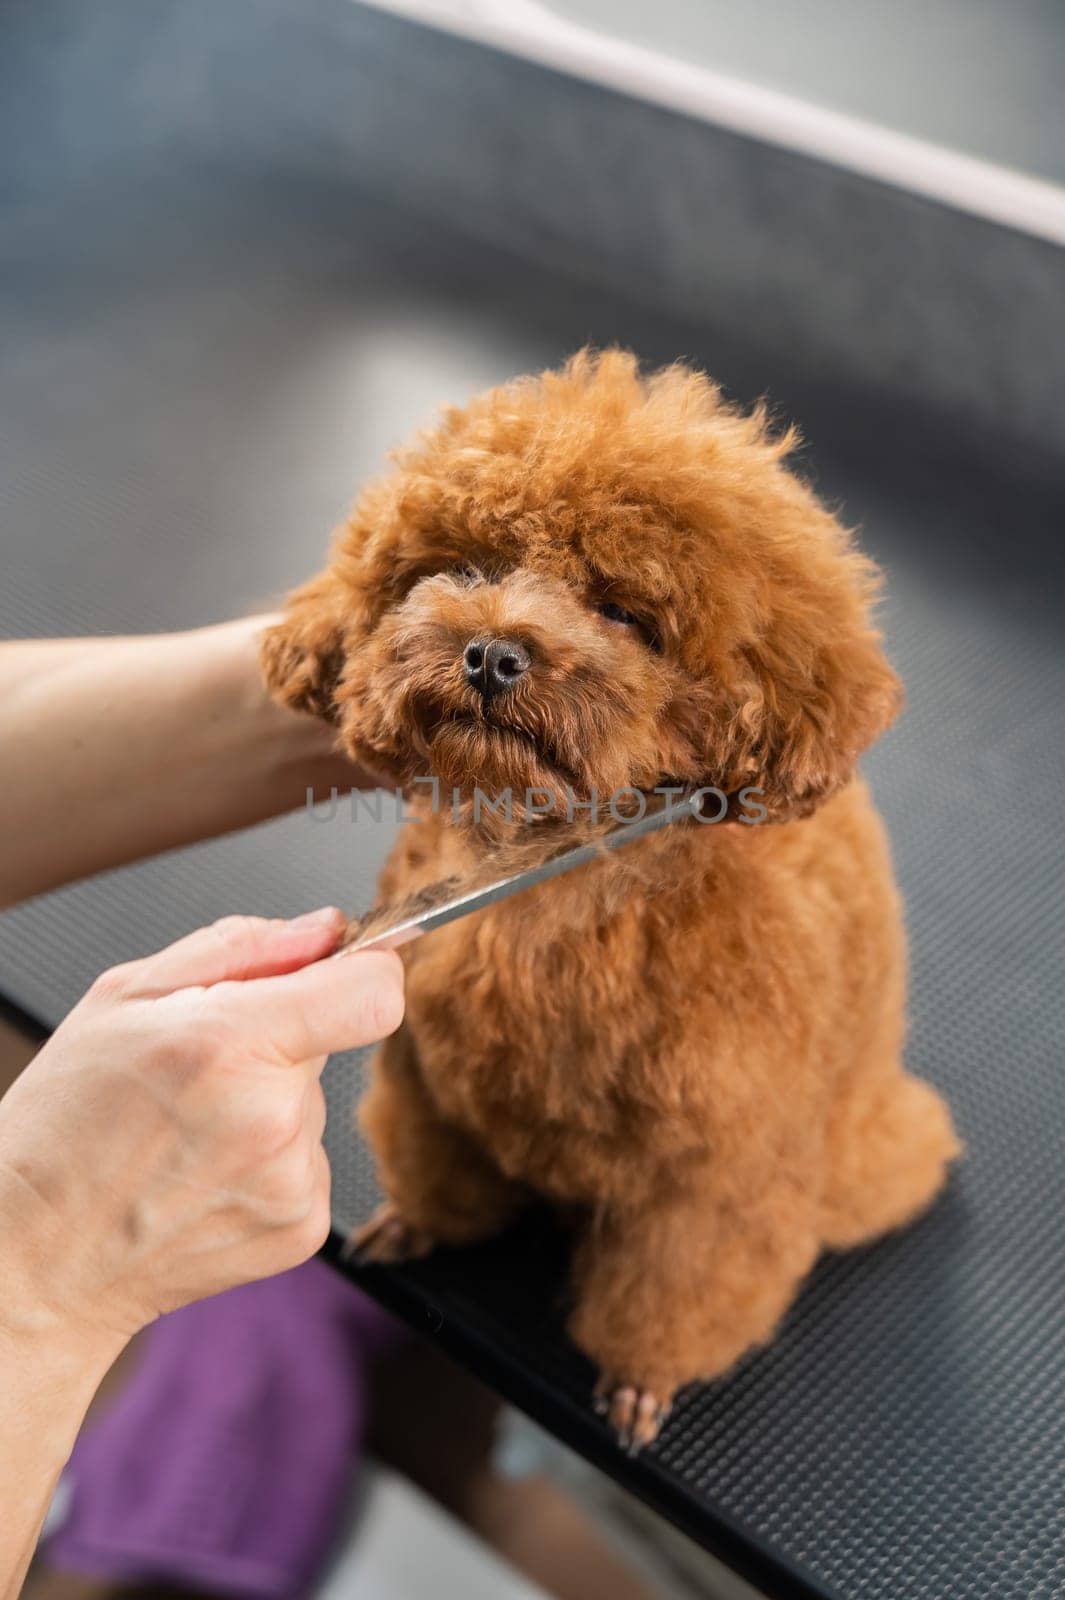 Woman combing a toy poodle during a haircut in a grooming salon. by mrwed54